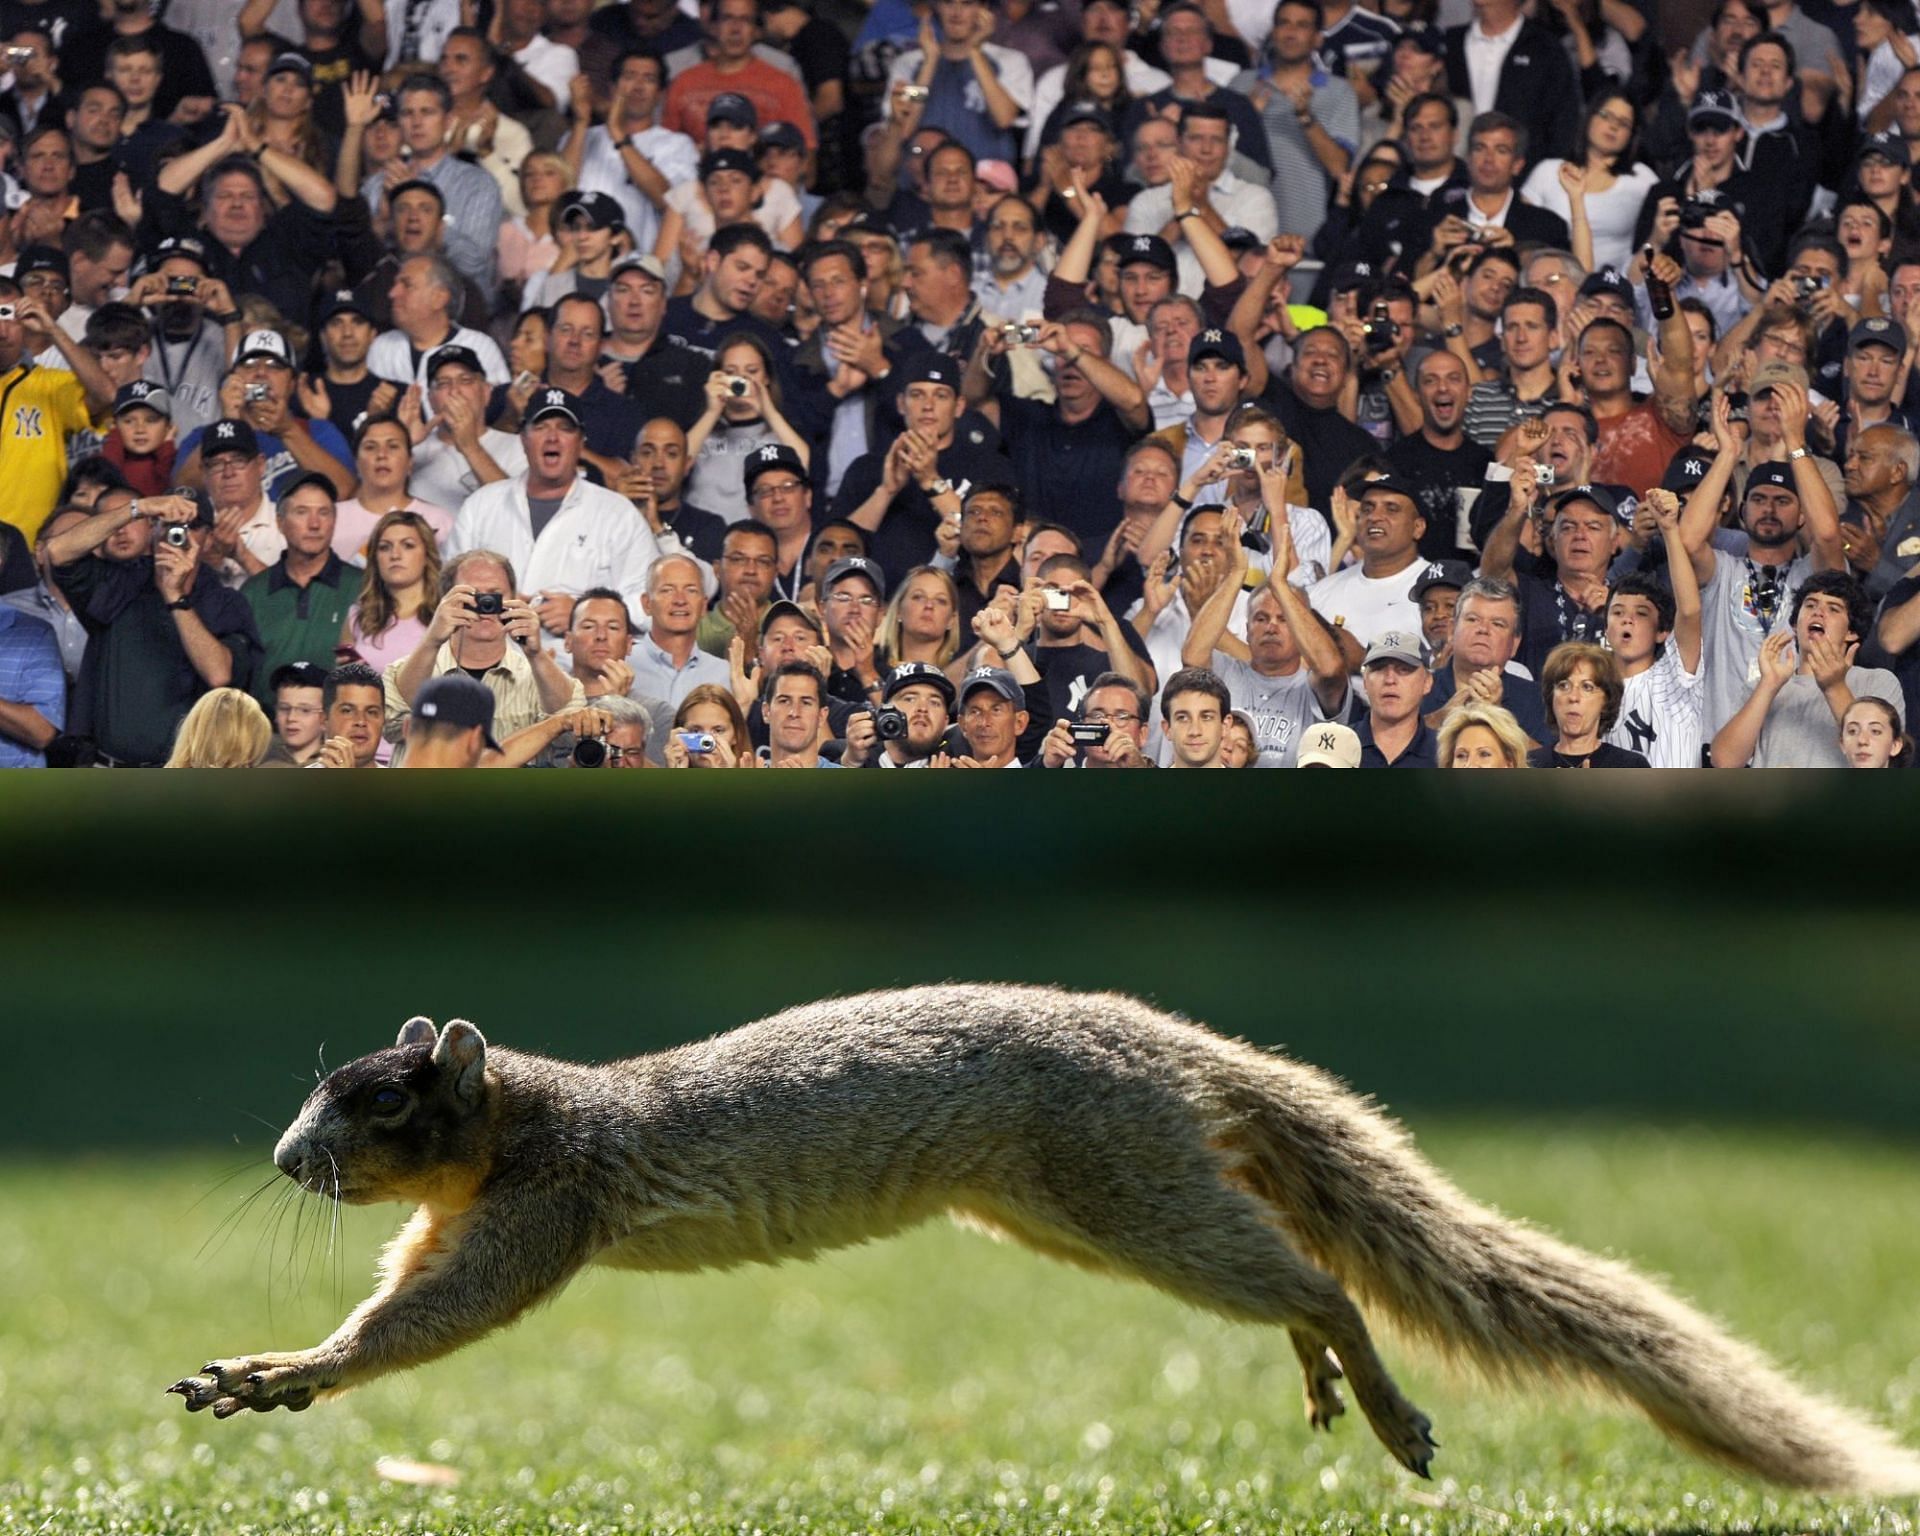 Hilarious memes flood MLB Twitter after fans' shocked reaction to a  squirrel at Yankees stadium